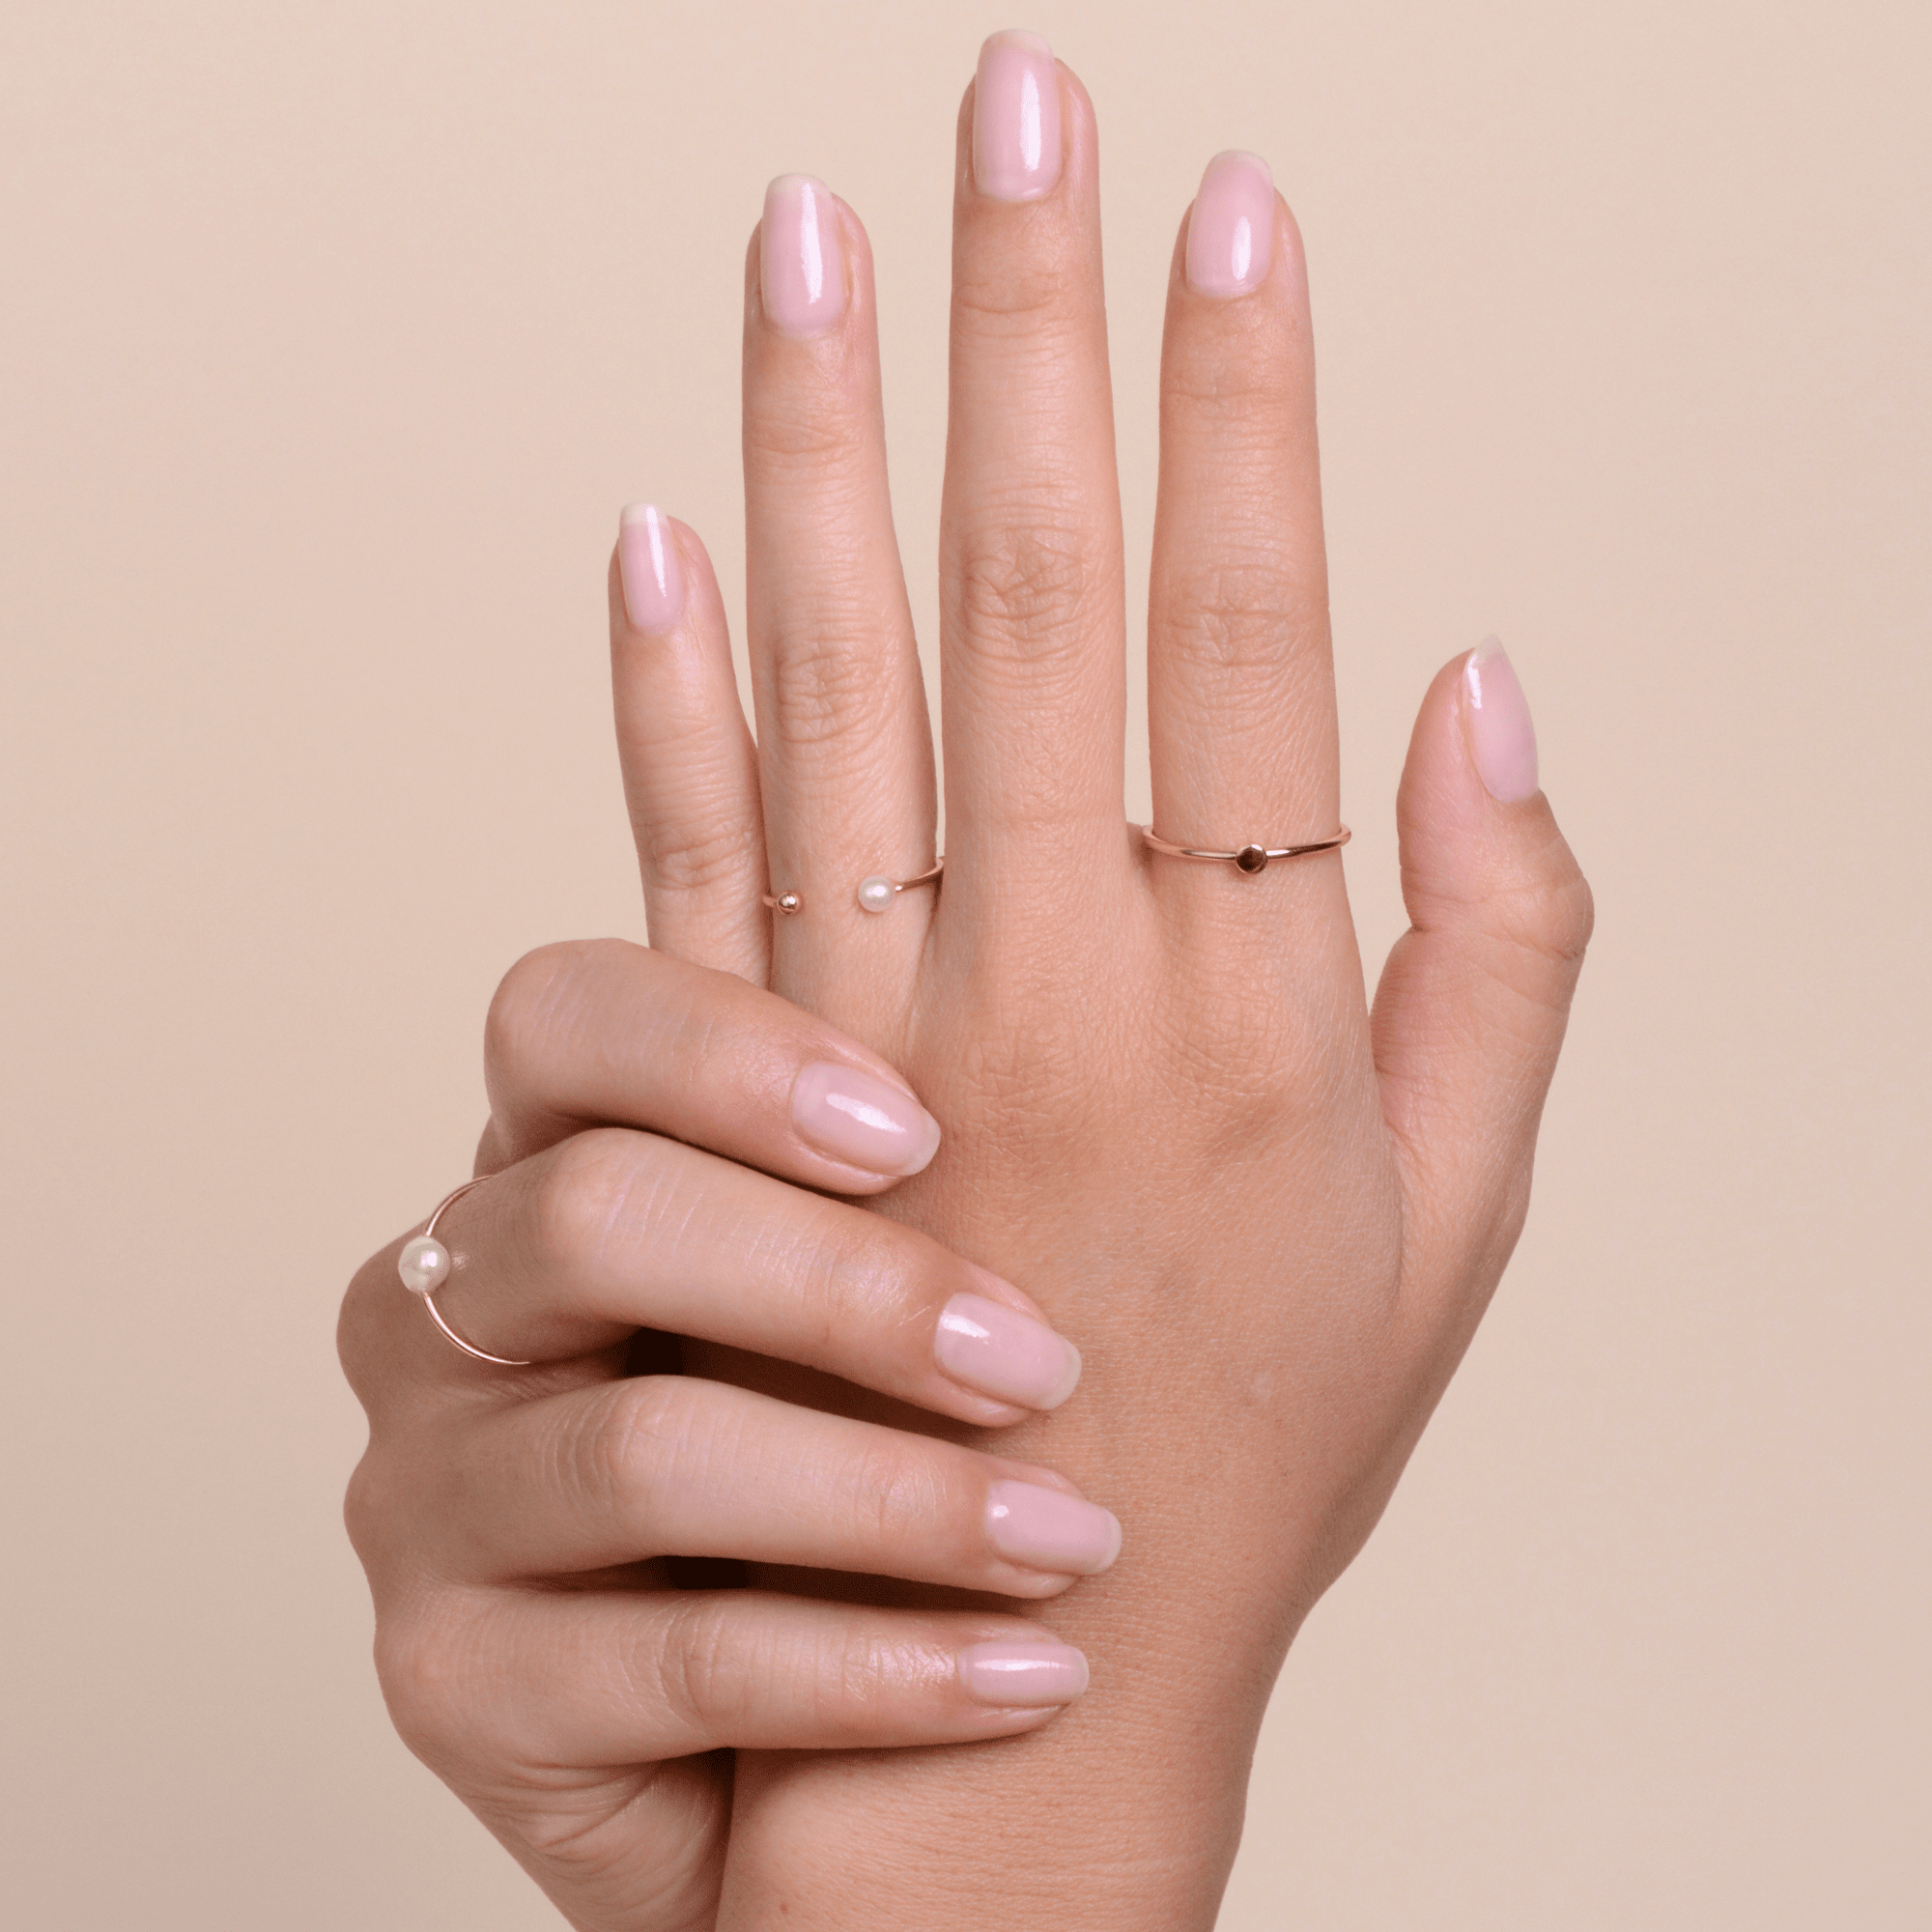 Get impeccable nails with the Japanese Manicure technique